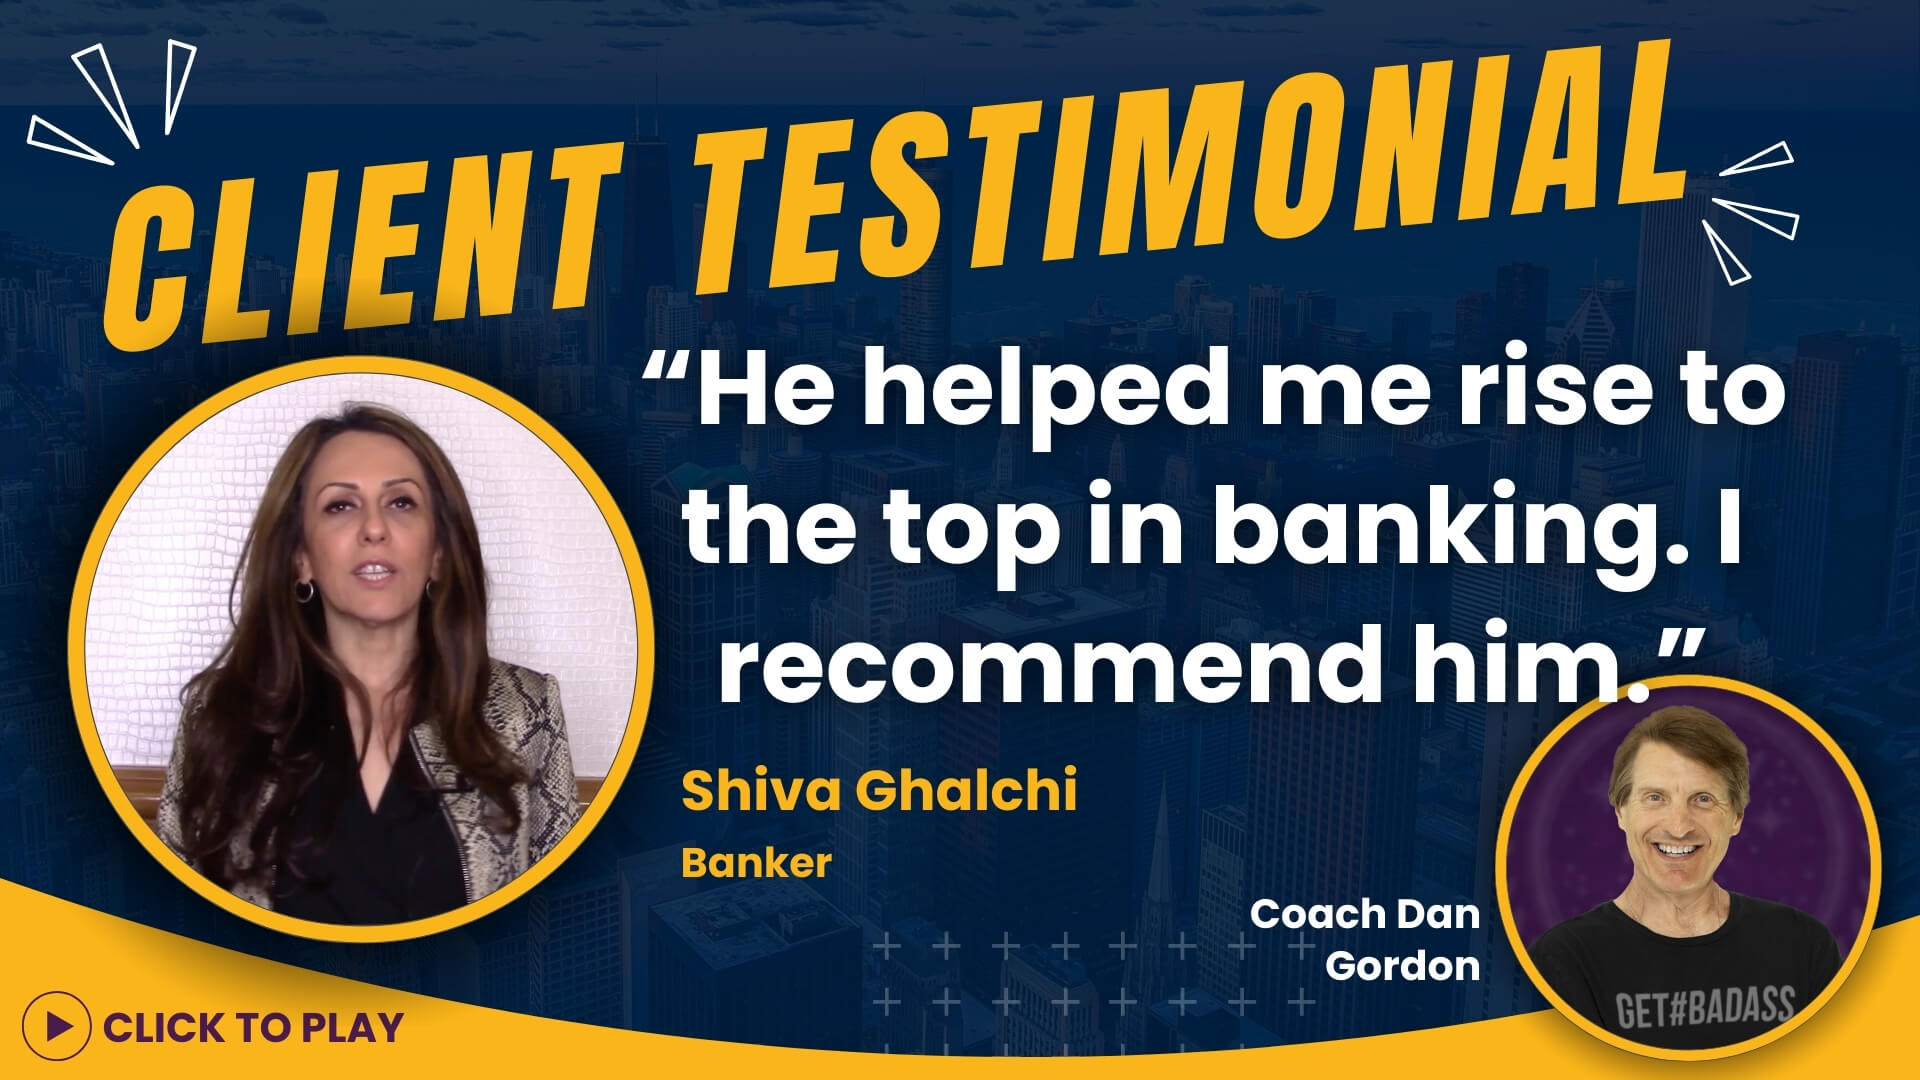 Shiva Ghalchi, dressed in a professional blazer, shares her second testimonial, crediting Coach Dan Gordon with helping her climb to the top of the banking industry.